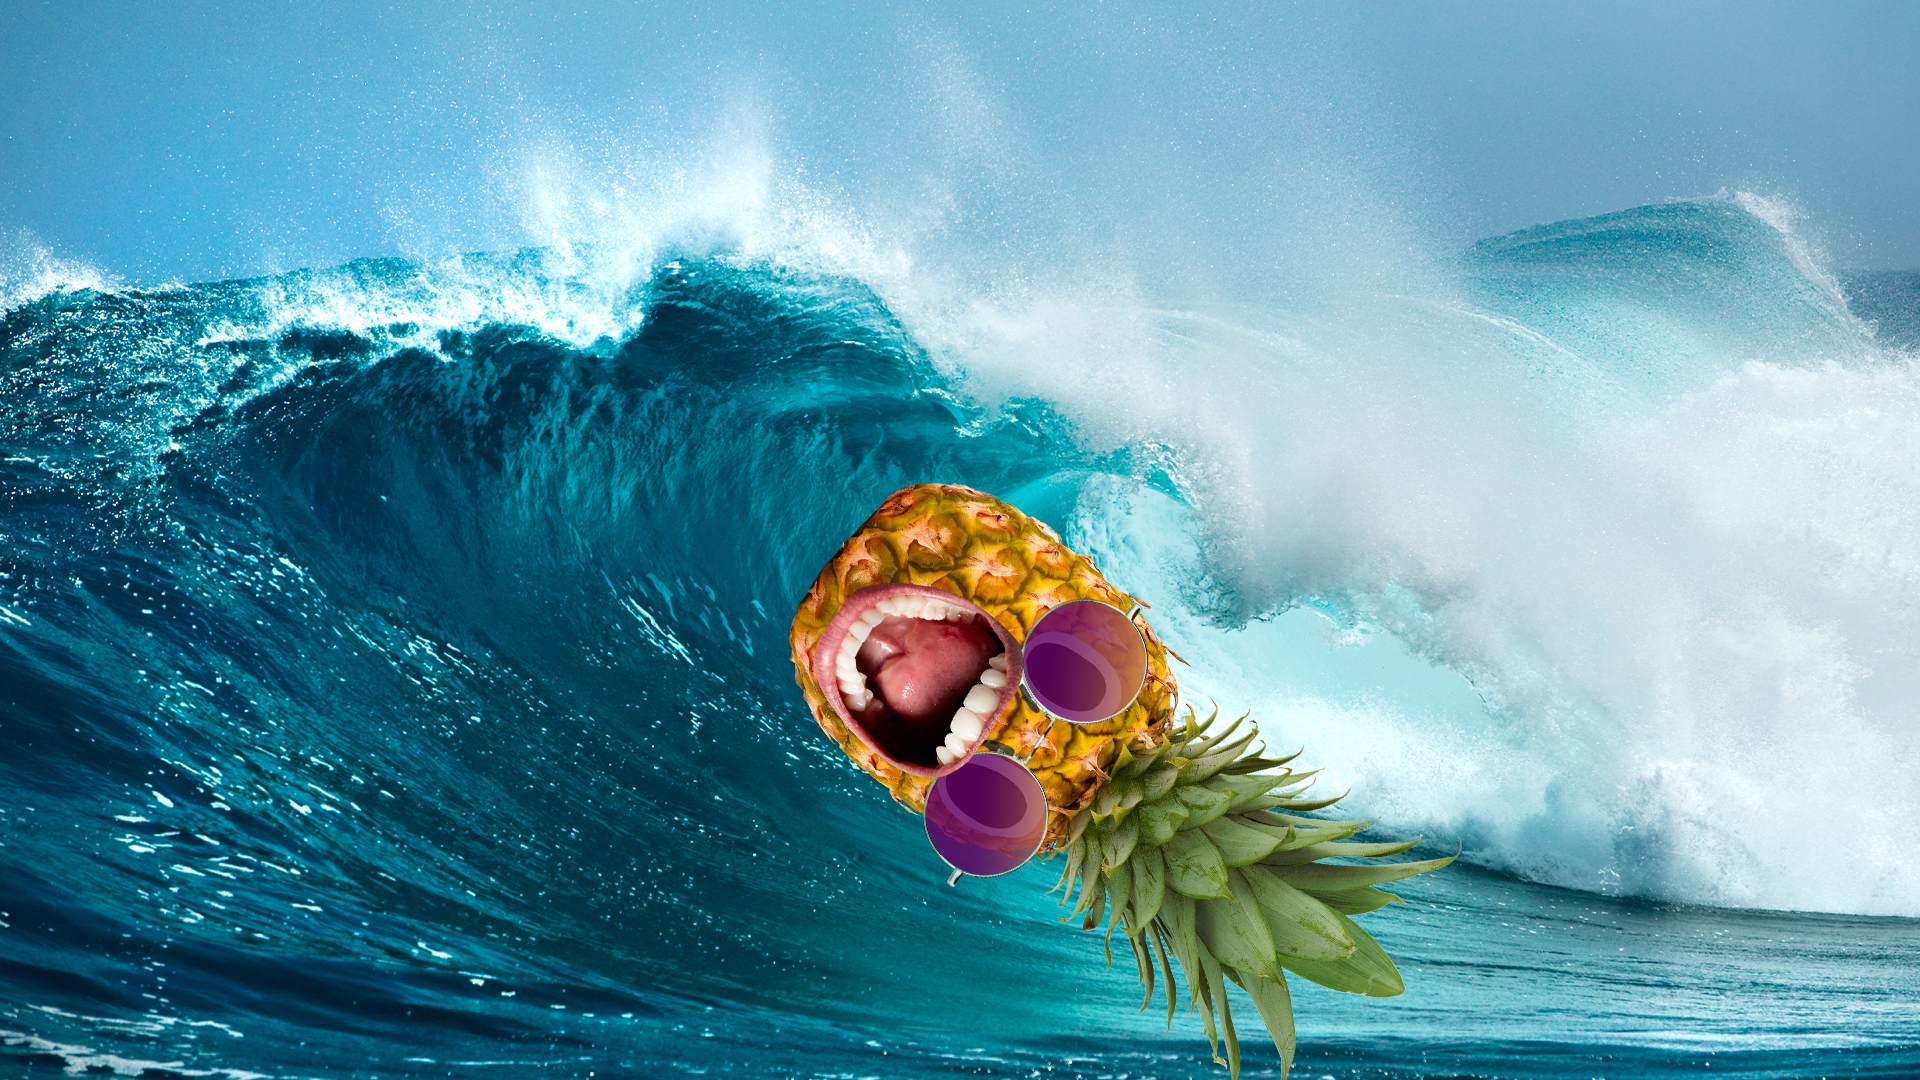 Wave crashing with pineapple in sunglasses